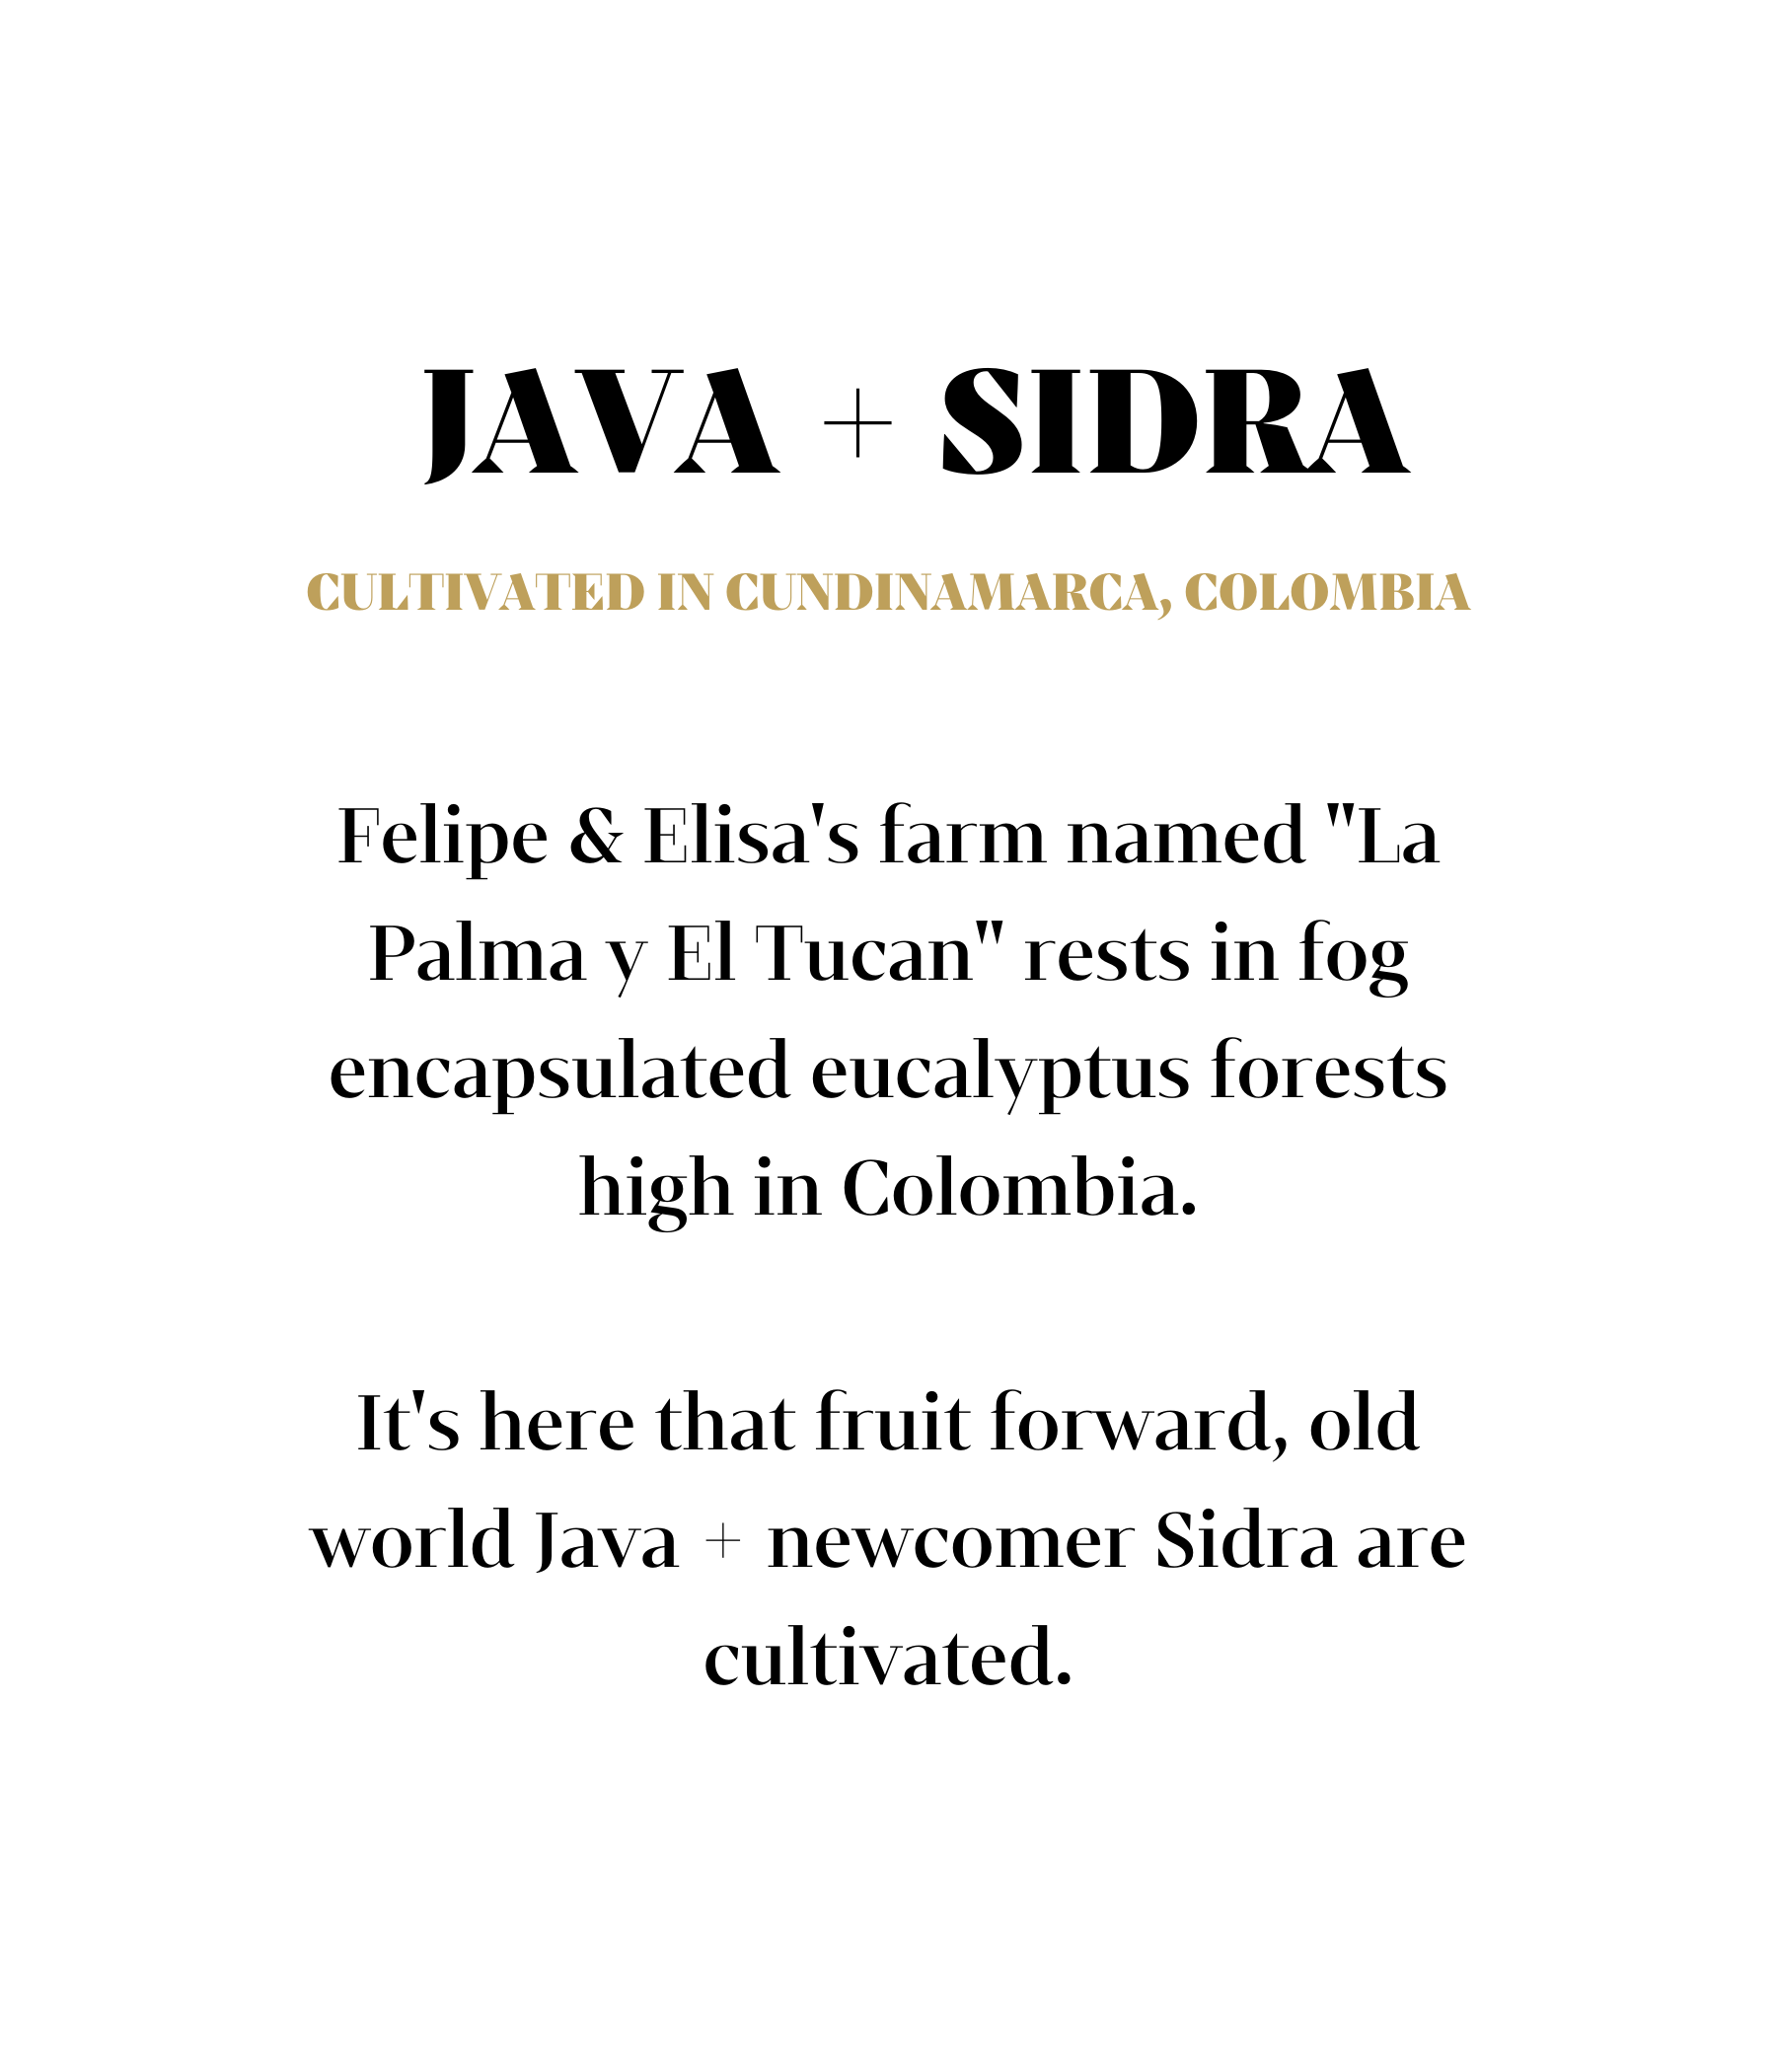 Java and Sidra cultivated in Cundinamarca Colombia